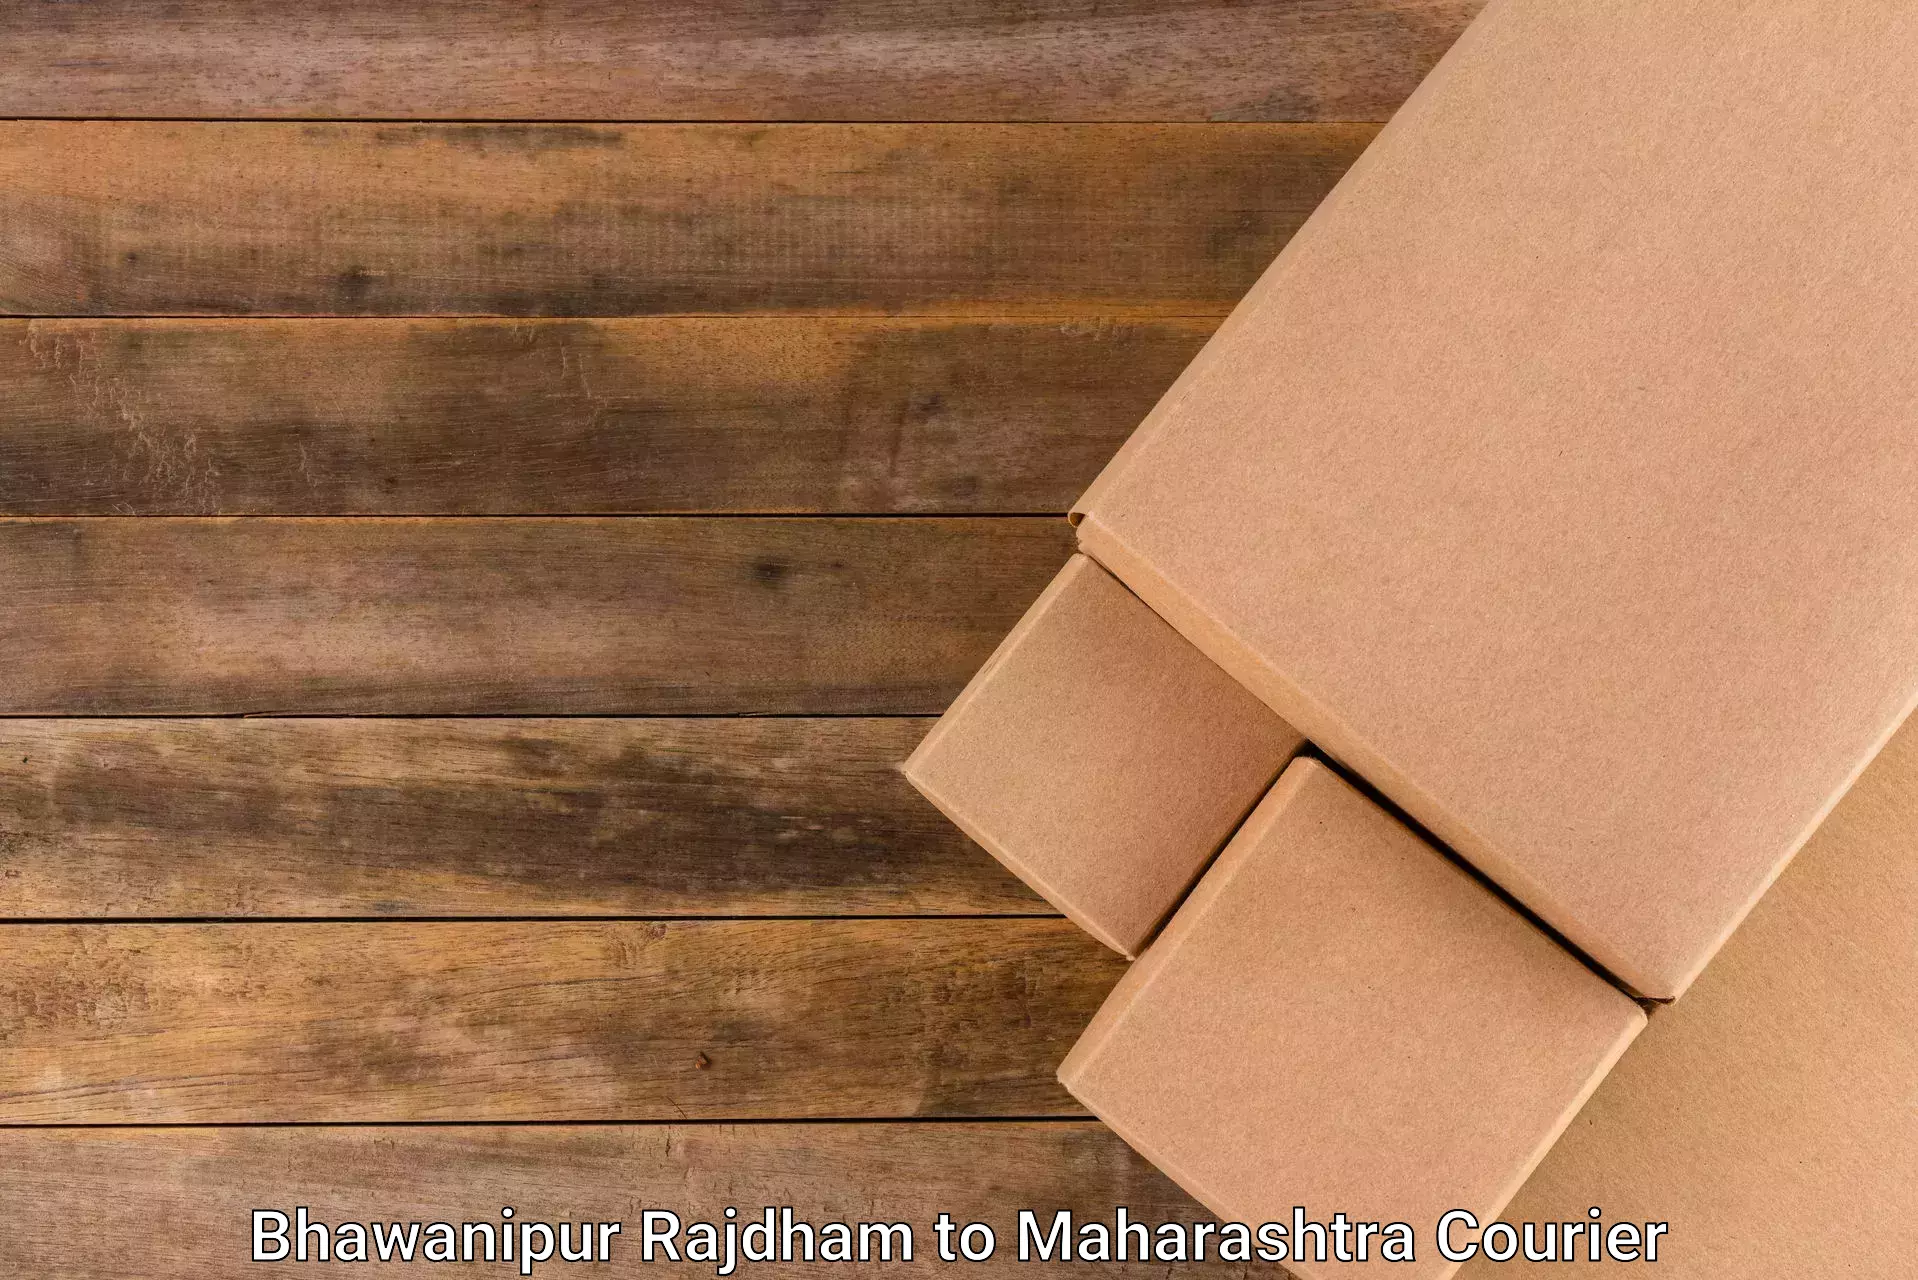 Reliable courier services in Bhawanipur Rajdham to Dadar